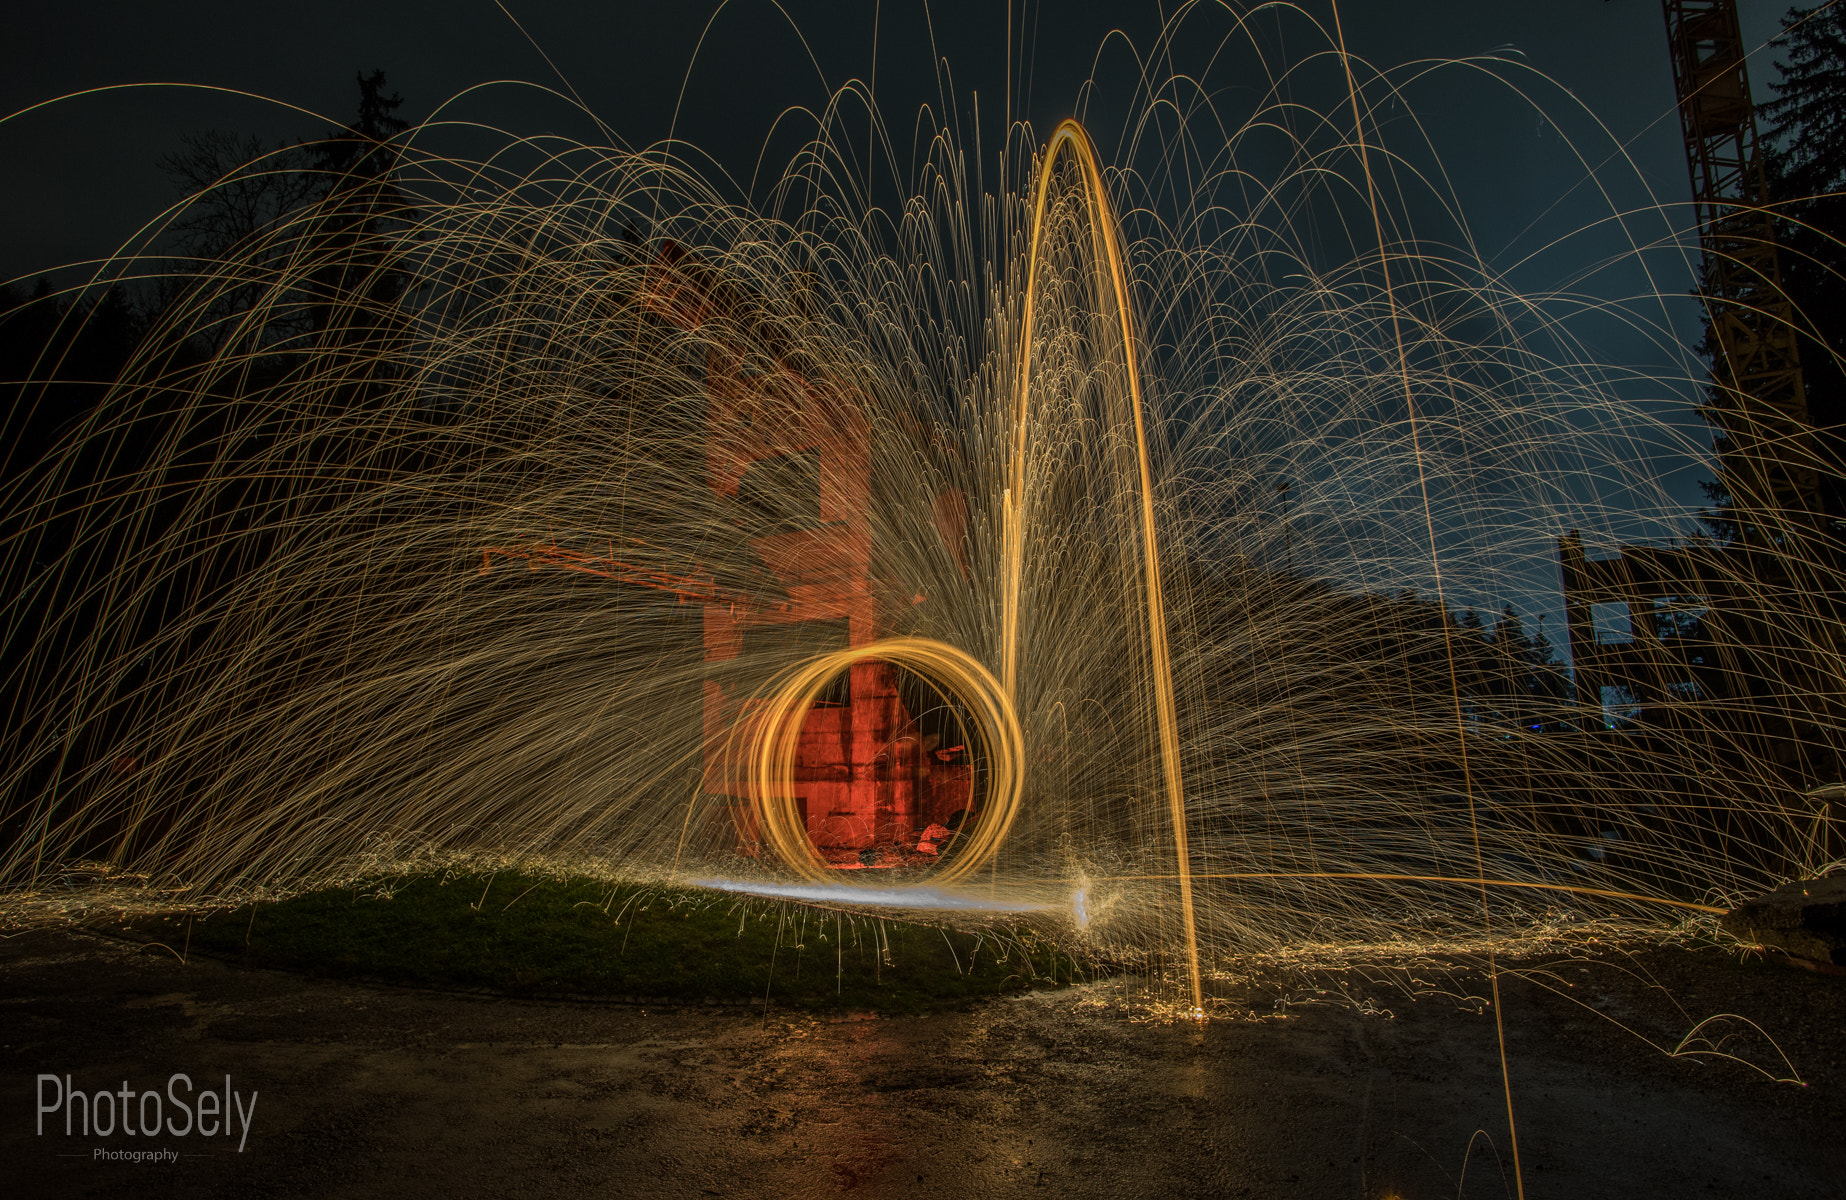 Sony a7 sample photo. Light-painting photography